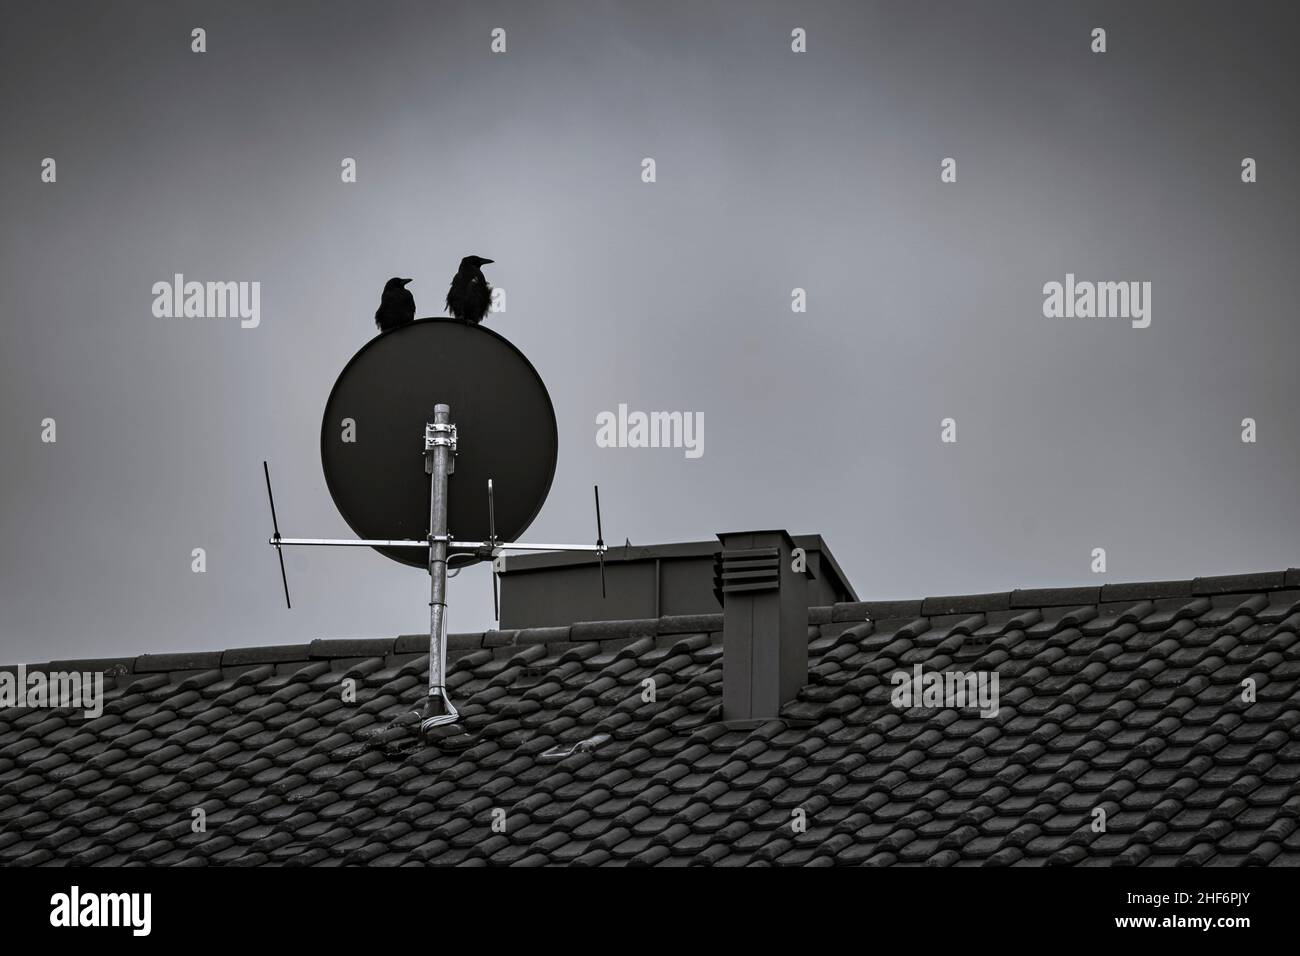 Two birds are sitting on a satellit dish at the roof of a house in black and white Stock Photo